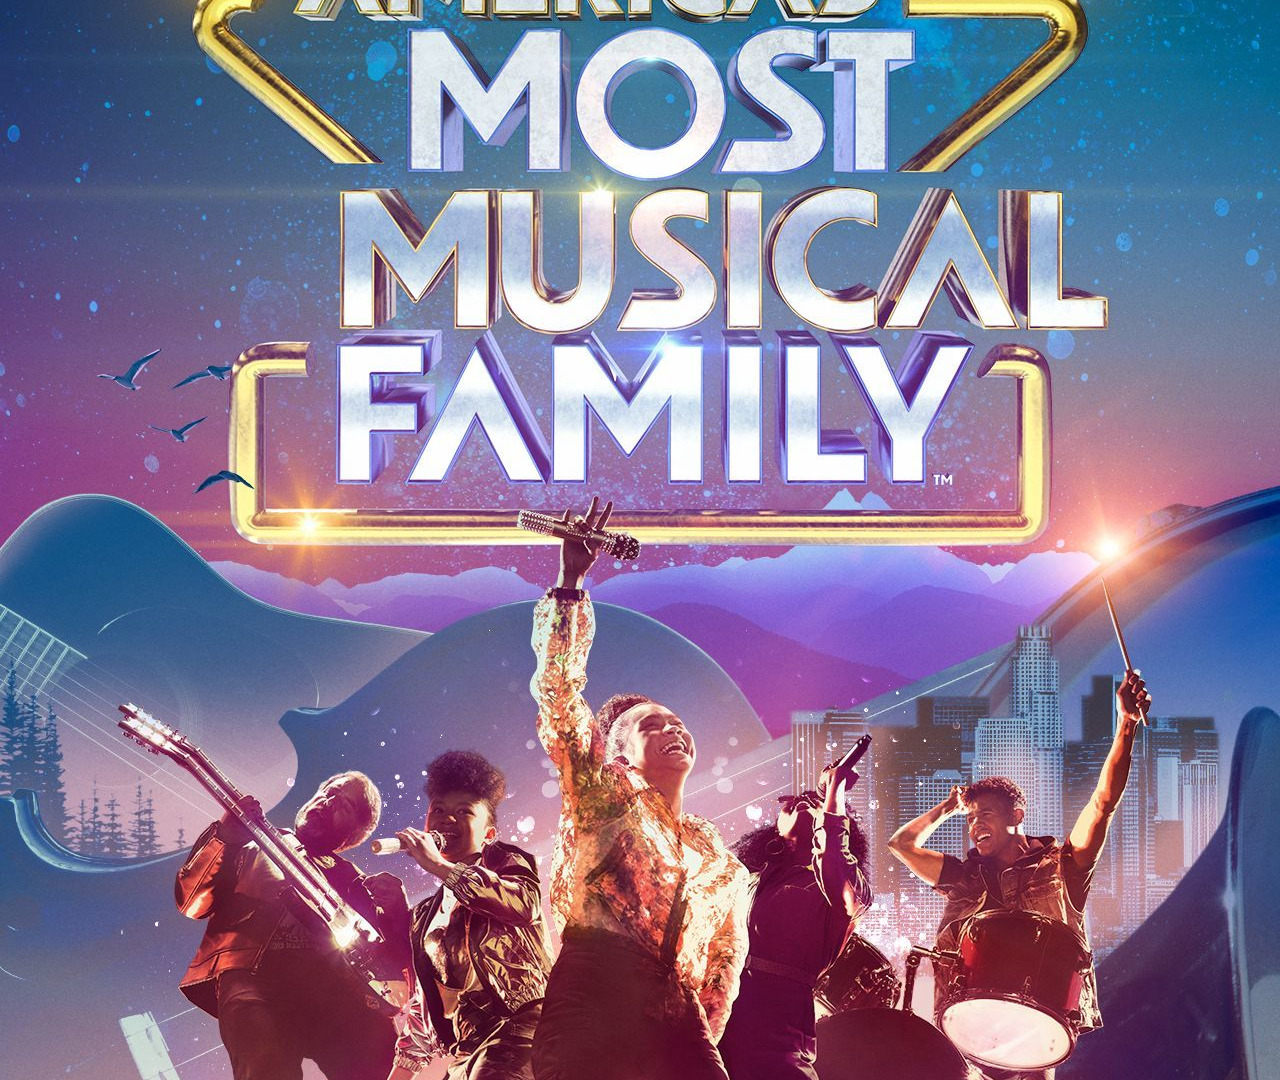 Show America's Most Musical Family